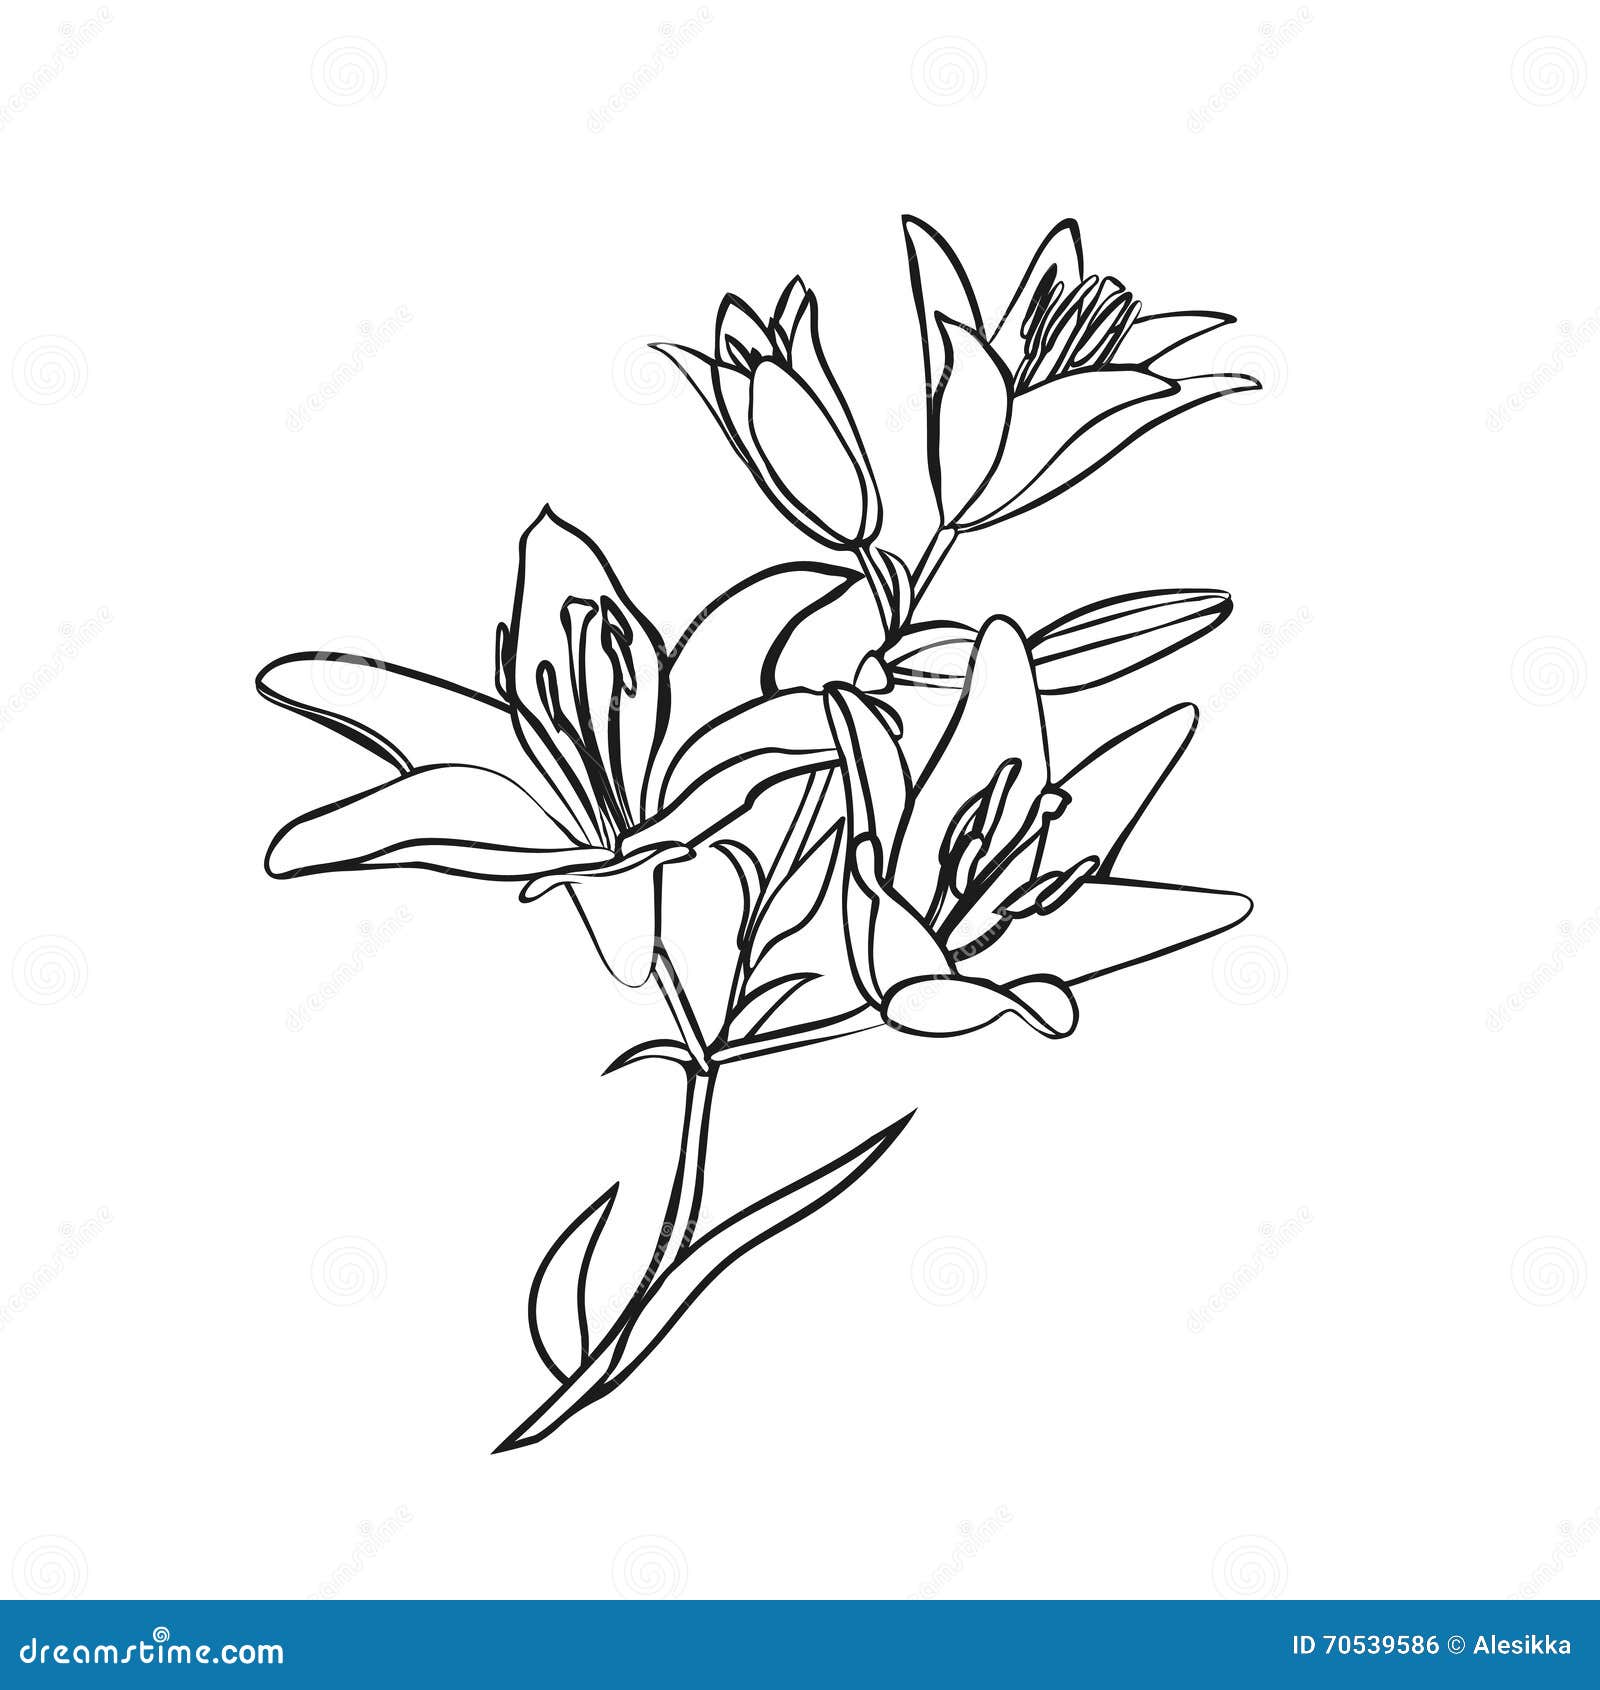 Lily Sketch on White Background. Stock Vector - Illustration of blossom ...